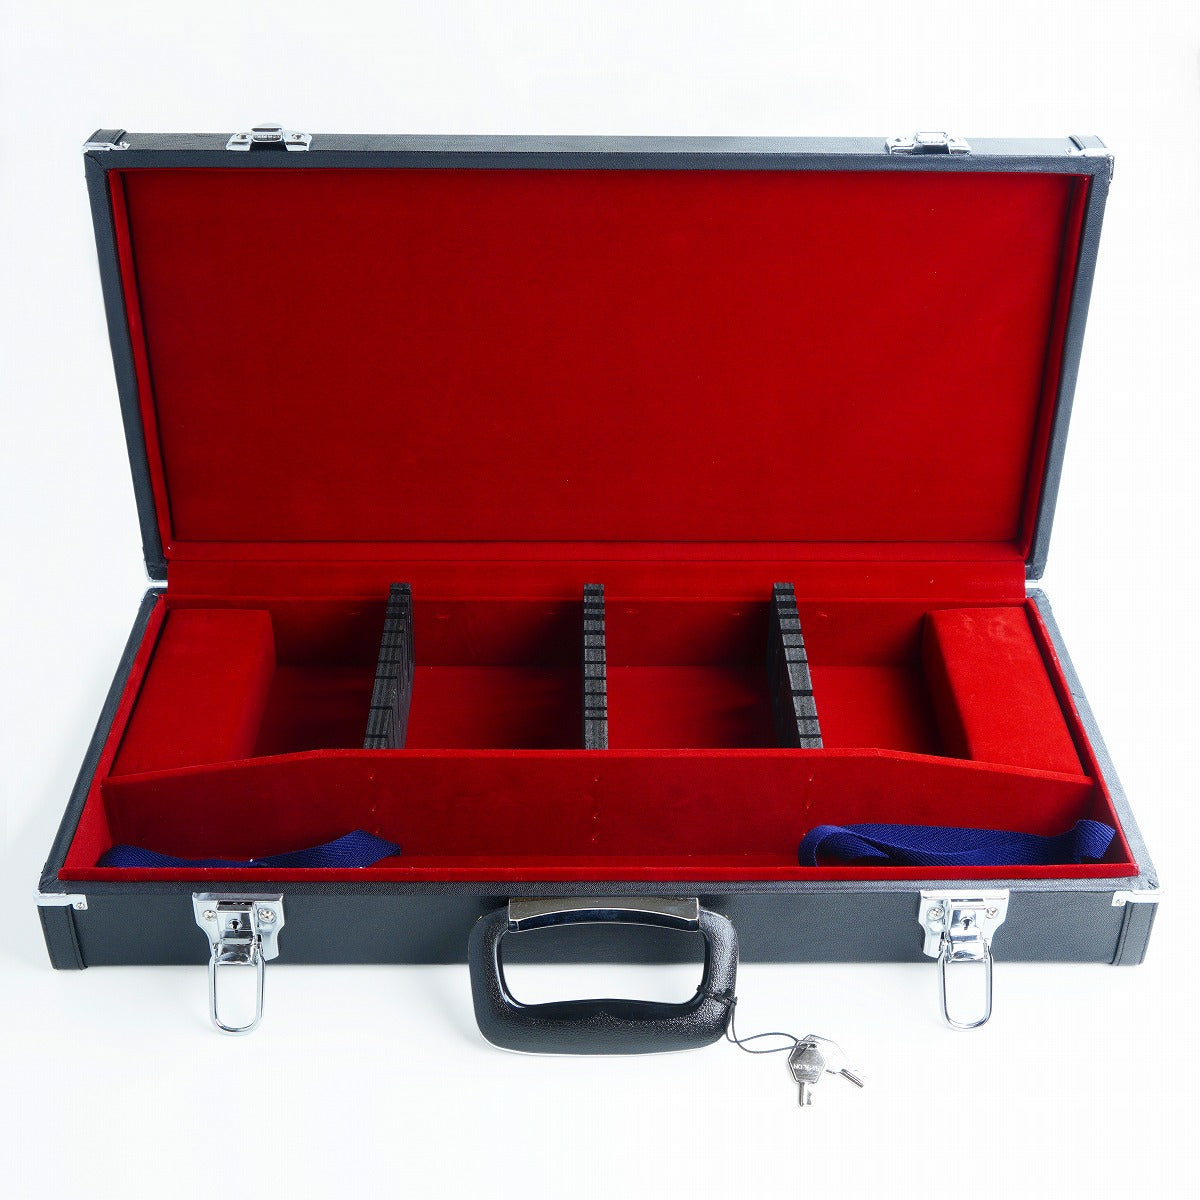 Leather Attache Case for Kitchen Knives (Western style 12 slots)